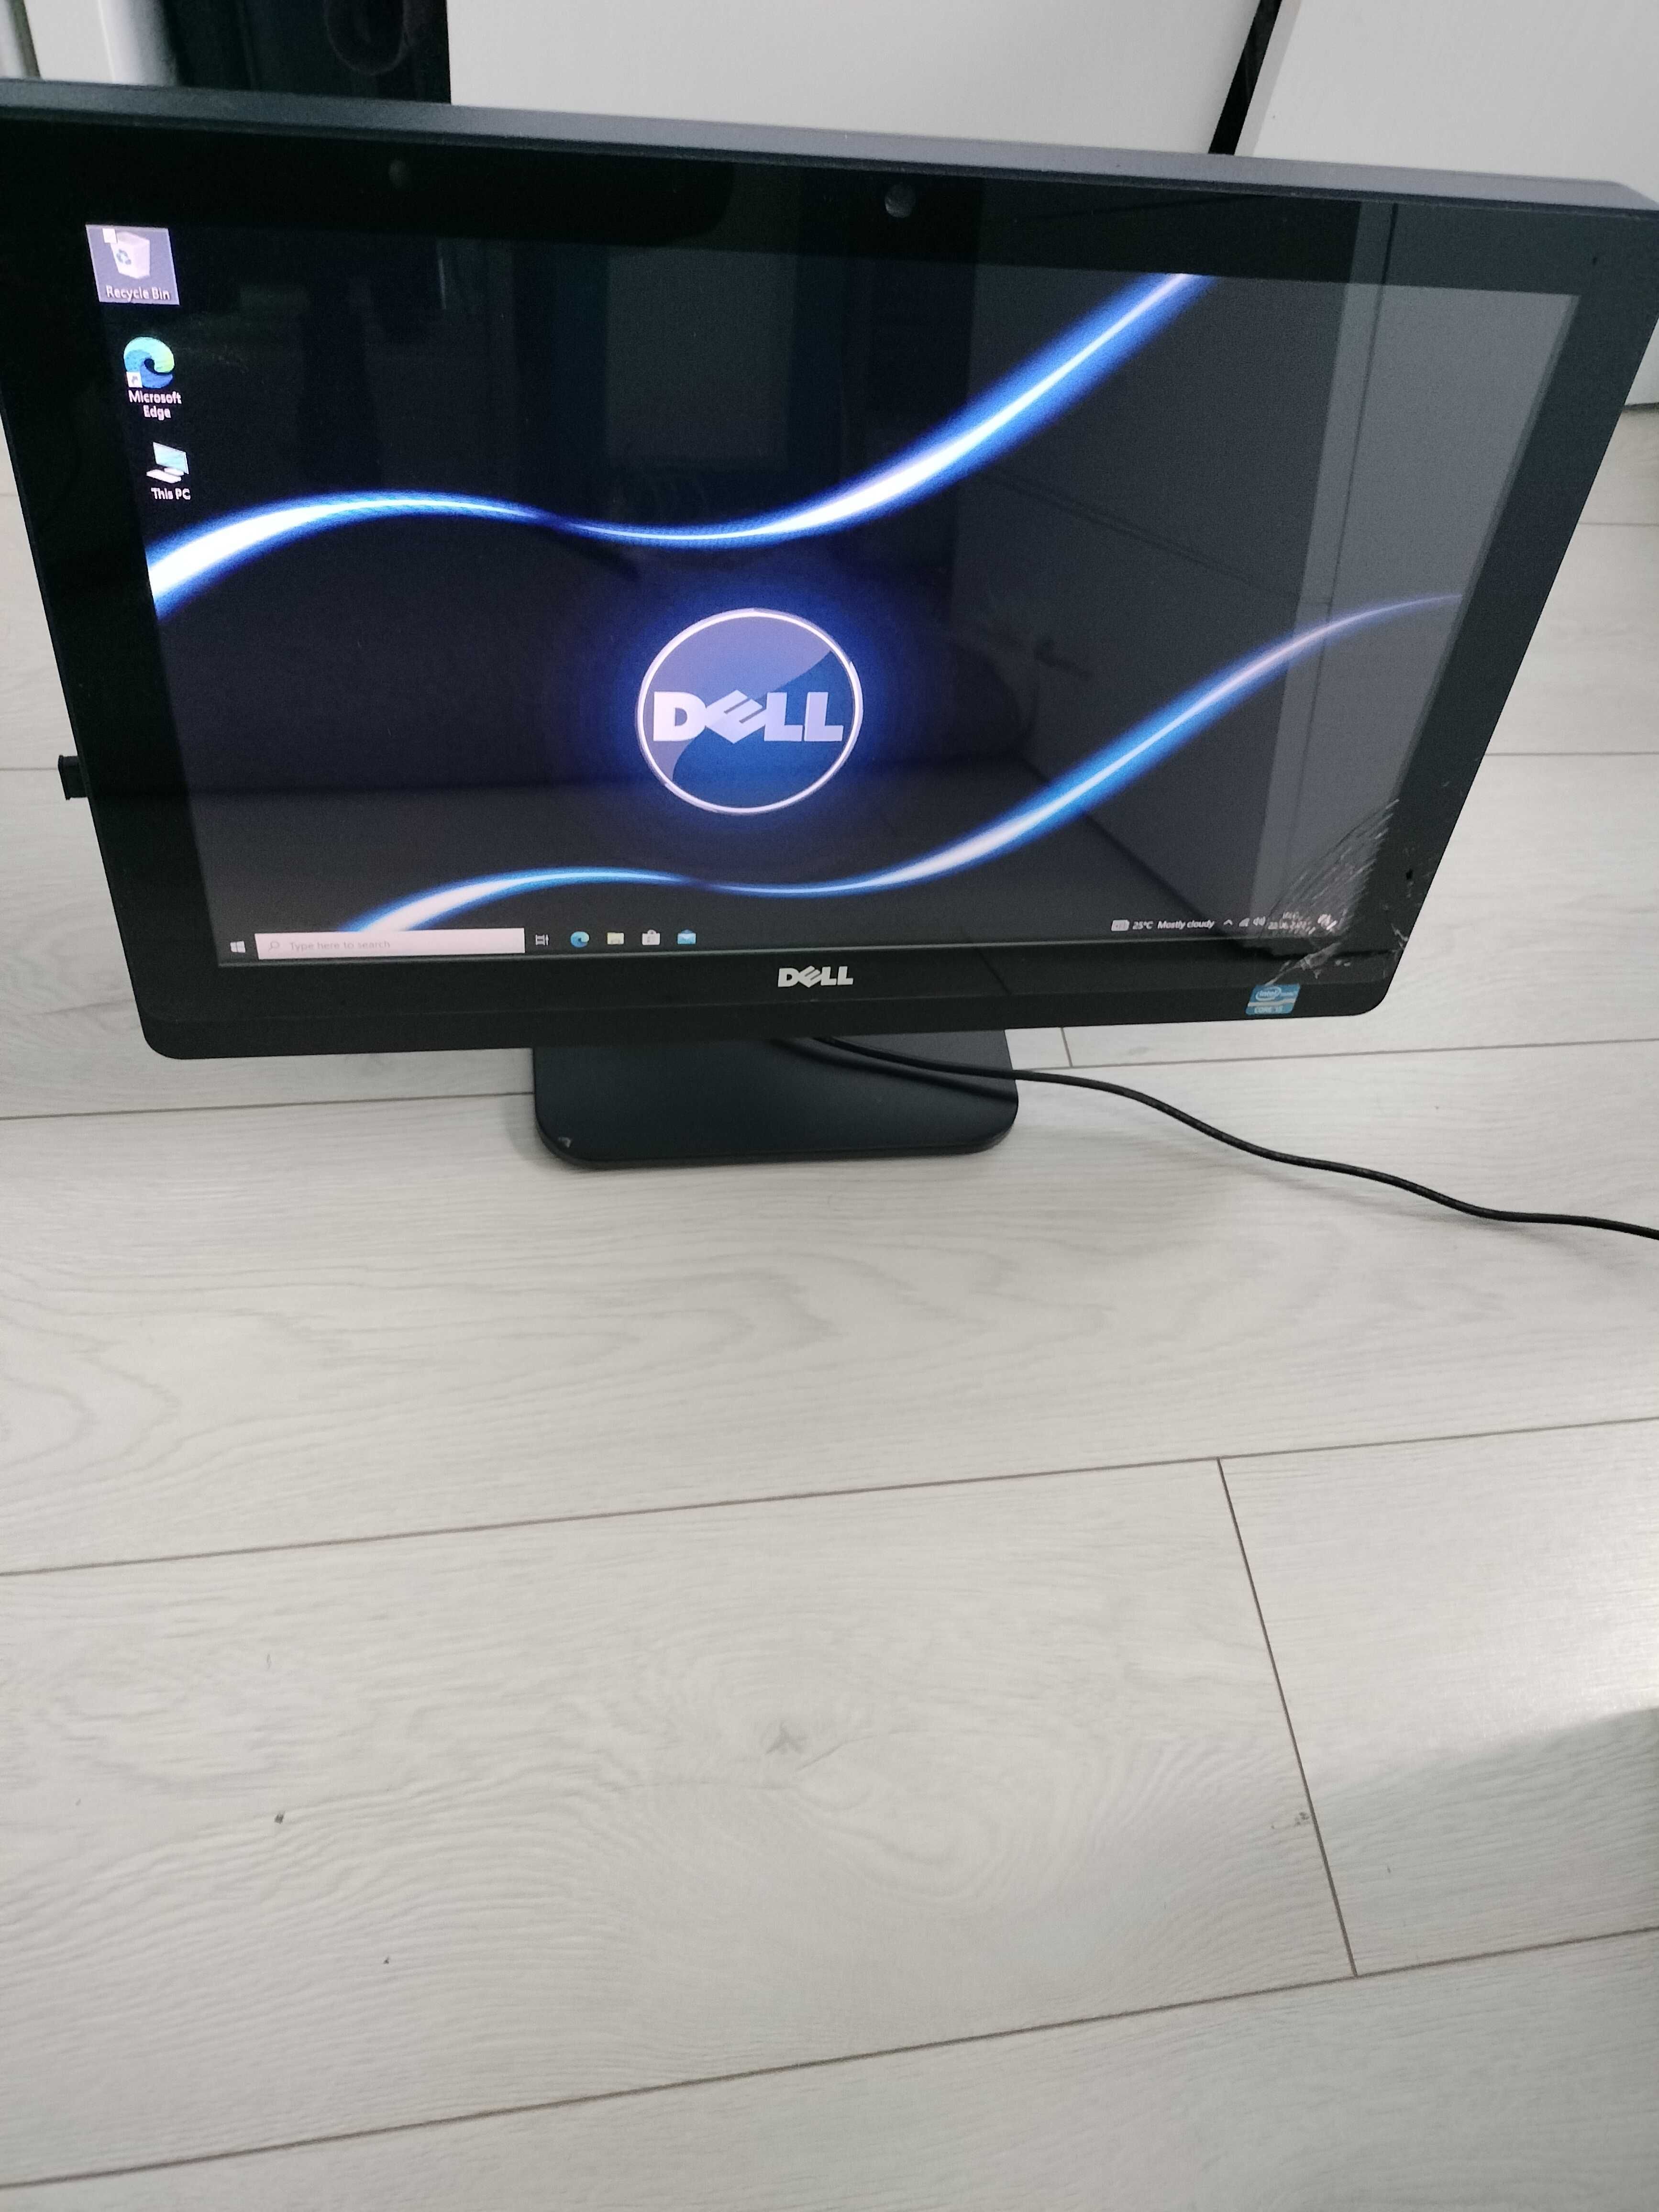 Dell All in One,i5-3470S,2.90Ghz,ram 8GB,HDD 500GB,Radeon HD8490S,20"